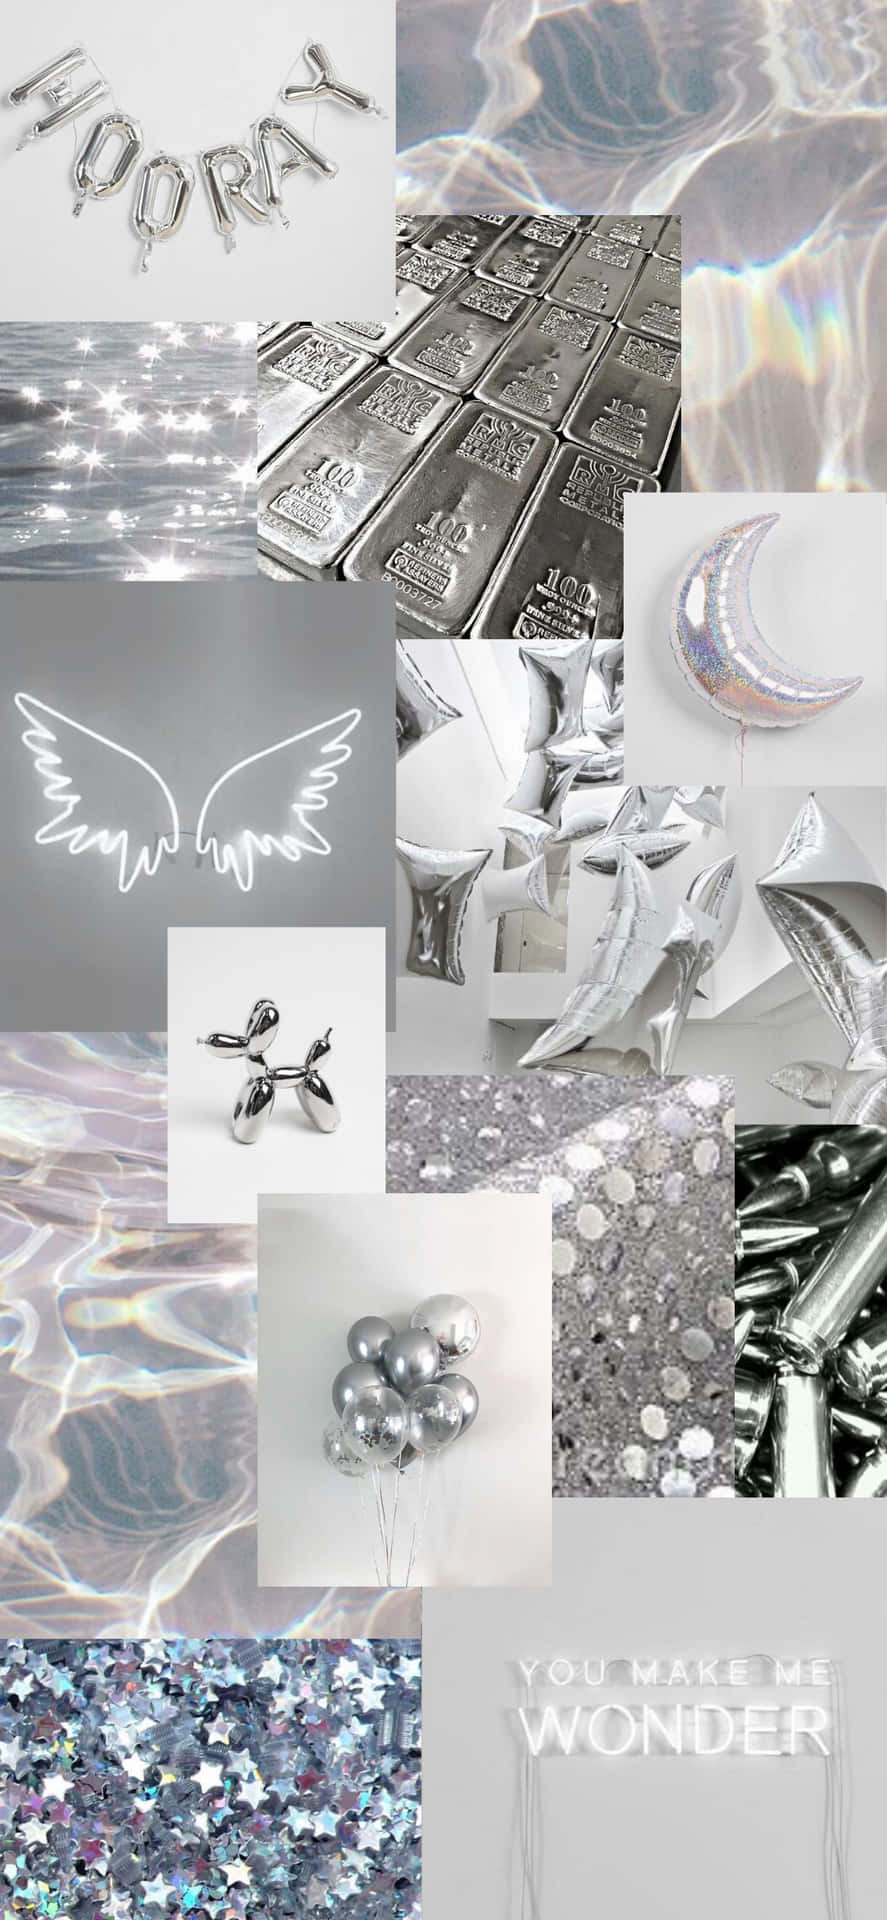 Stay on trend with this stylish silver aesthetic iPhone wallpaper Wallpaper